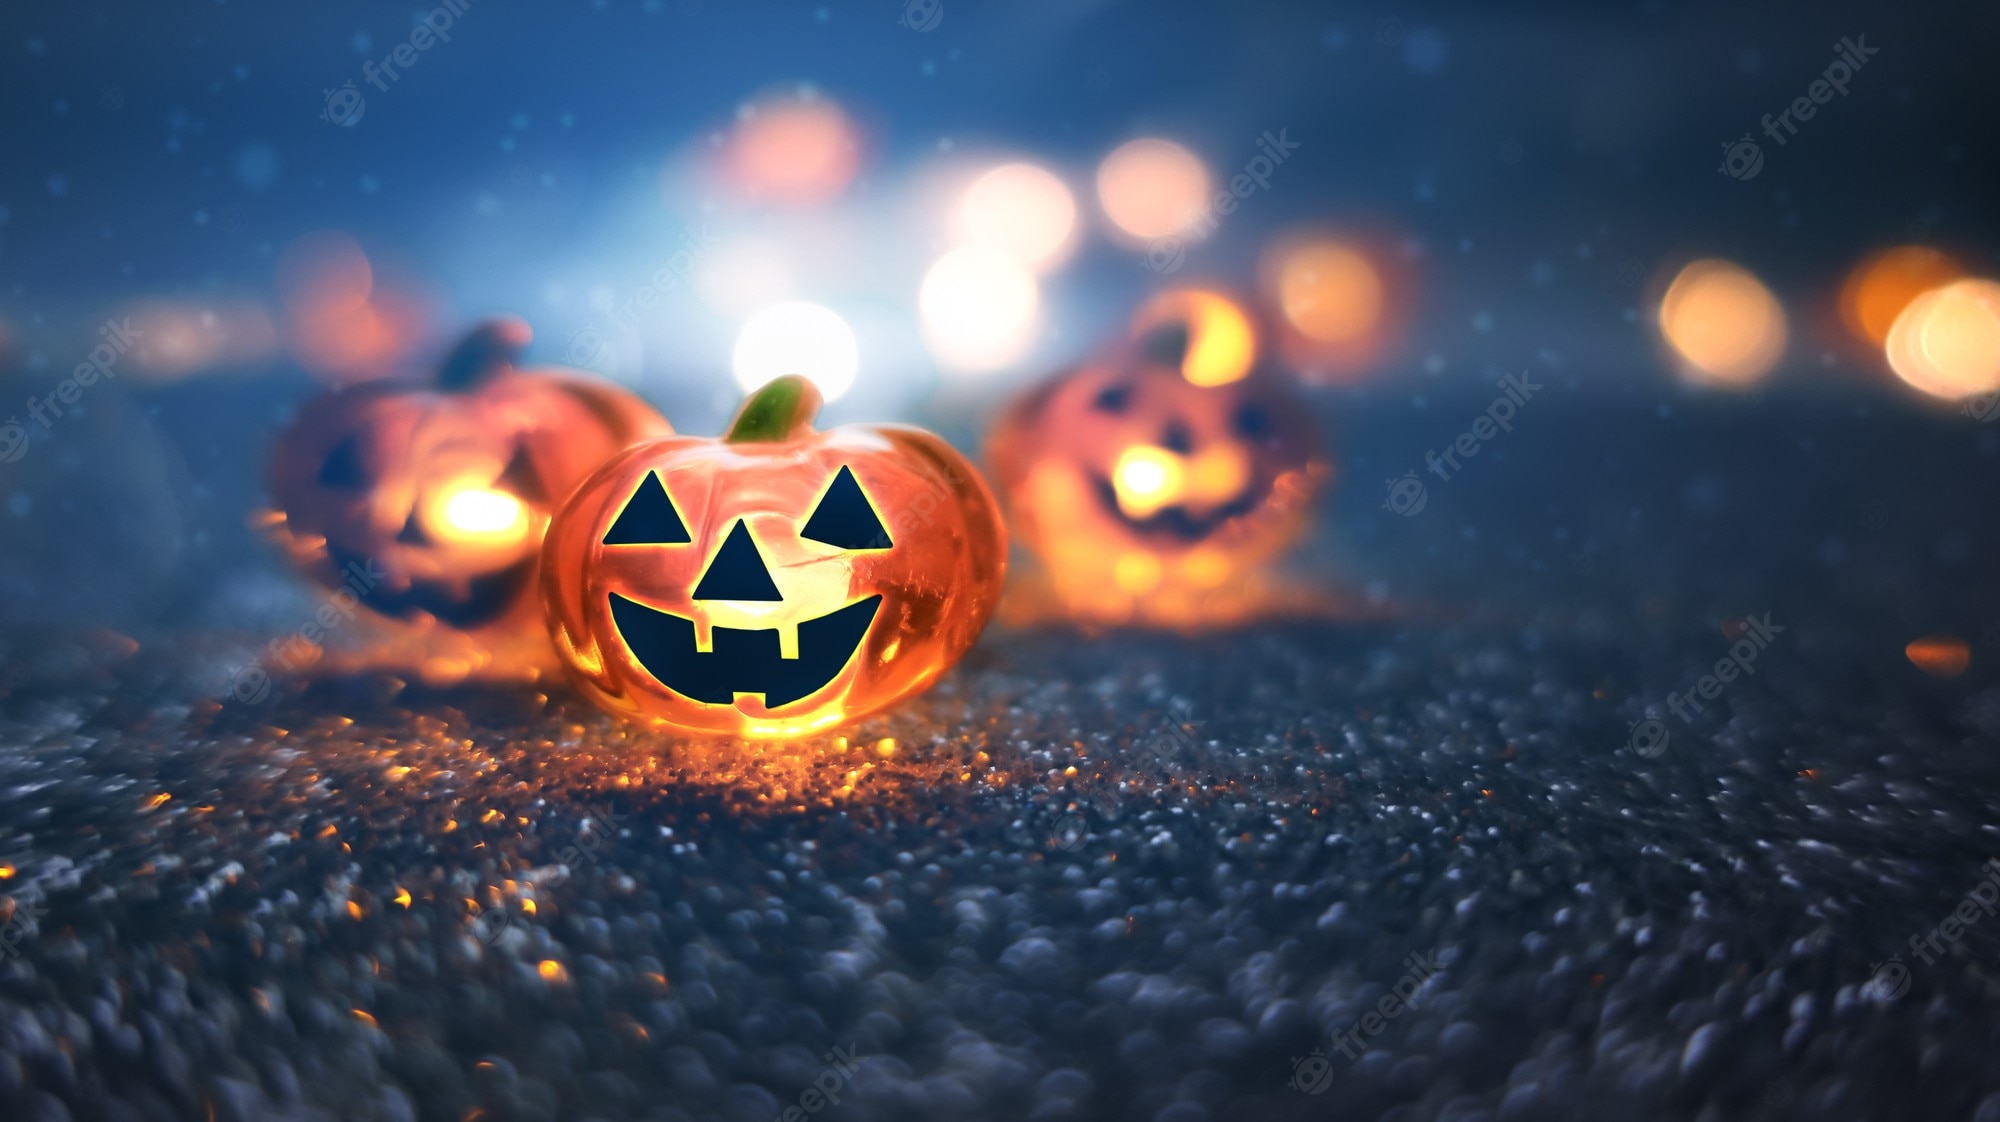 Premium Photo. Neon glowing pumpkin head on abstract blurred bokeh background. festive halloween background with cobwebs and pumpkin